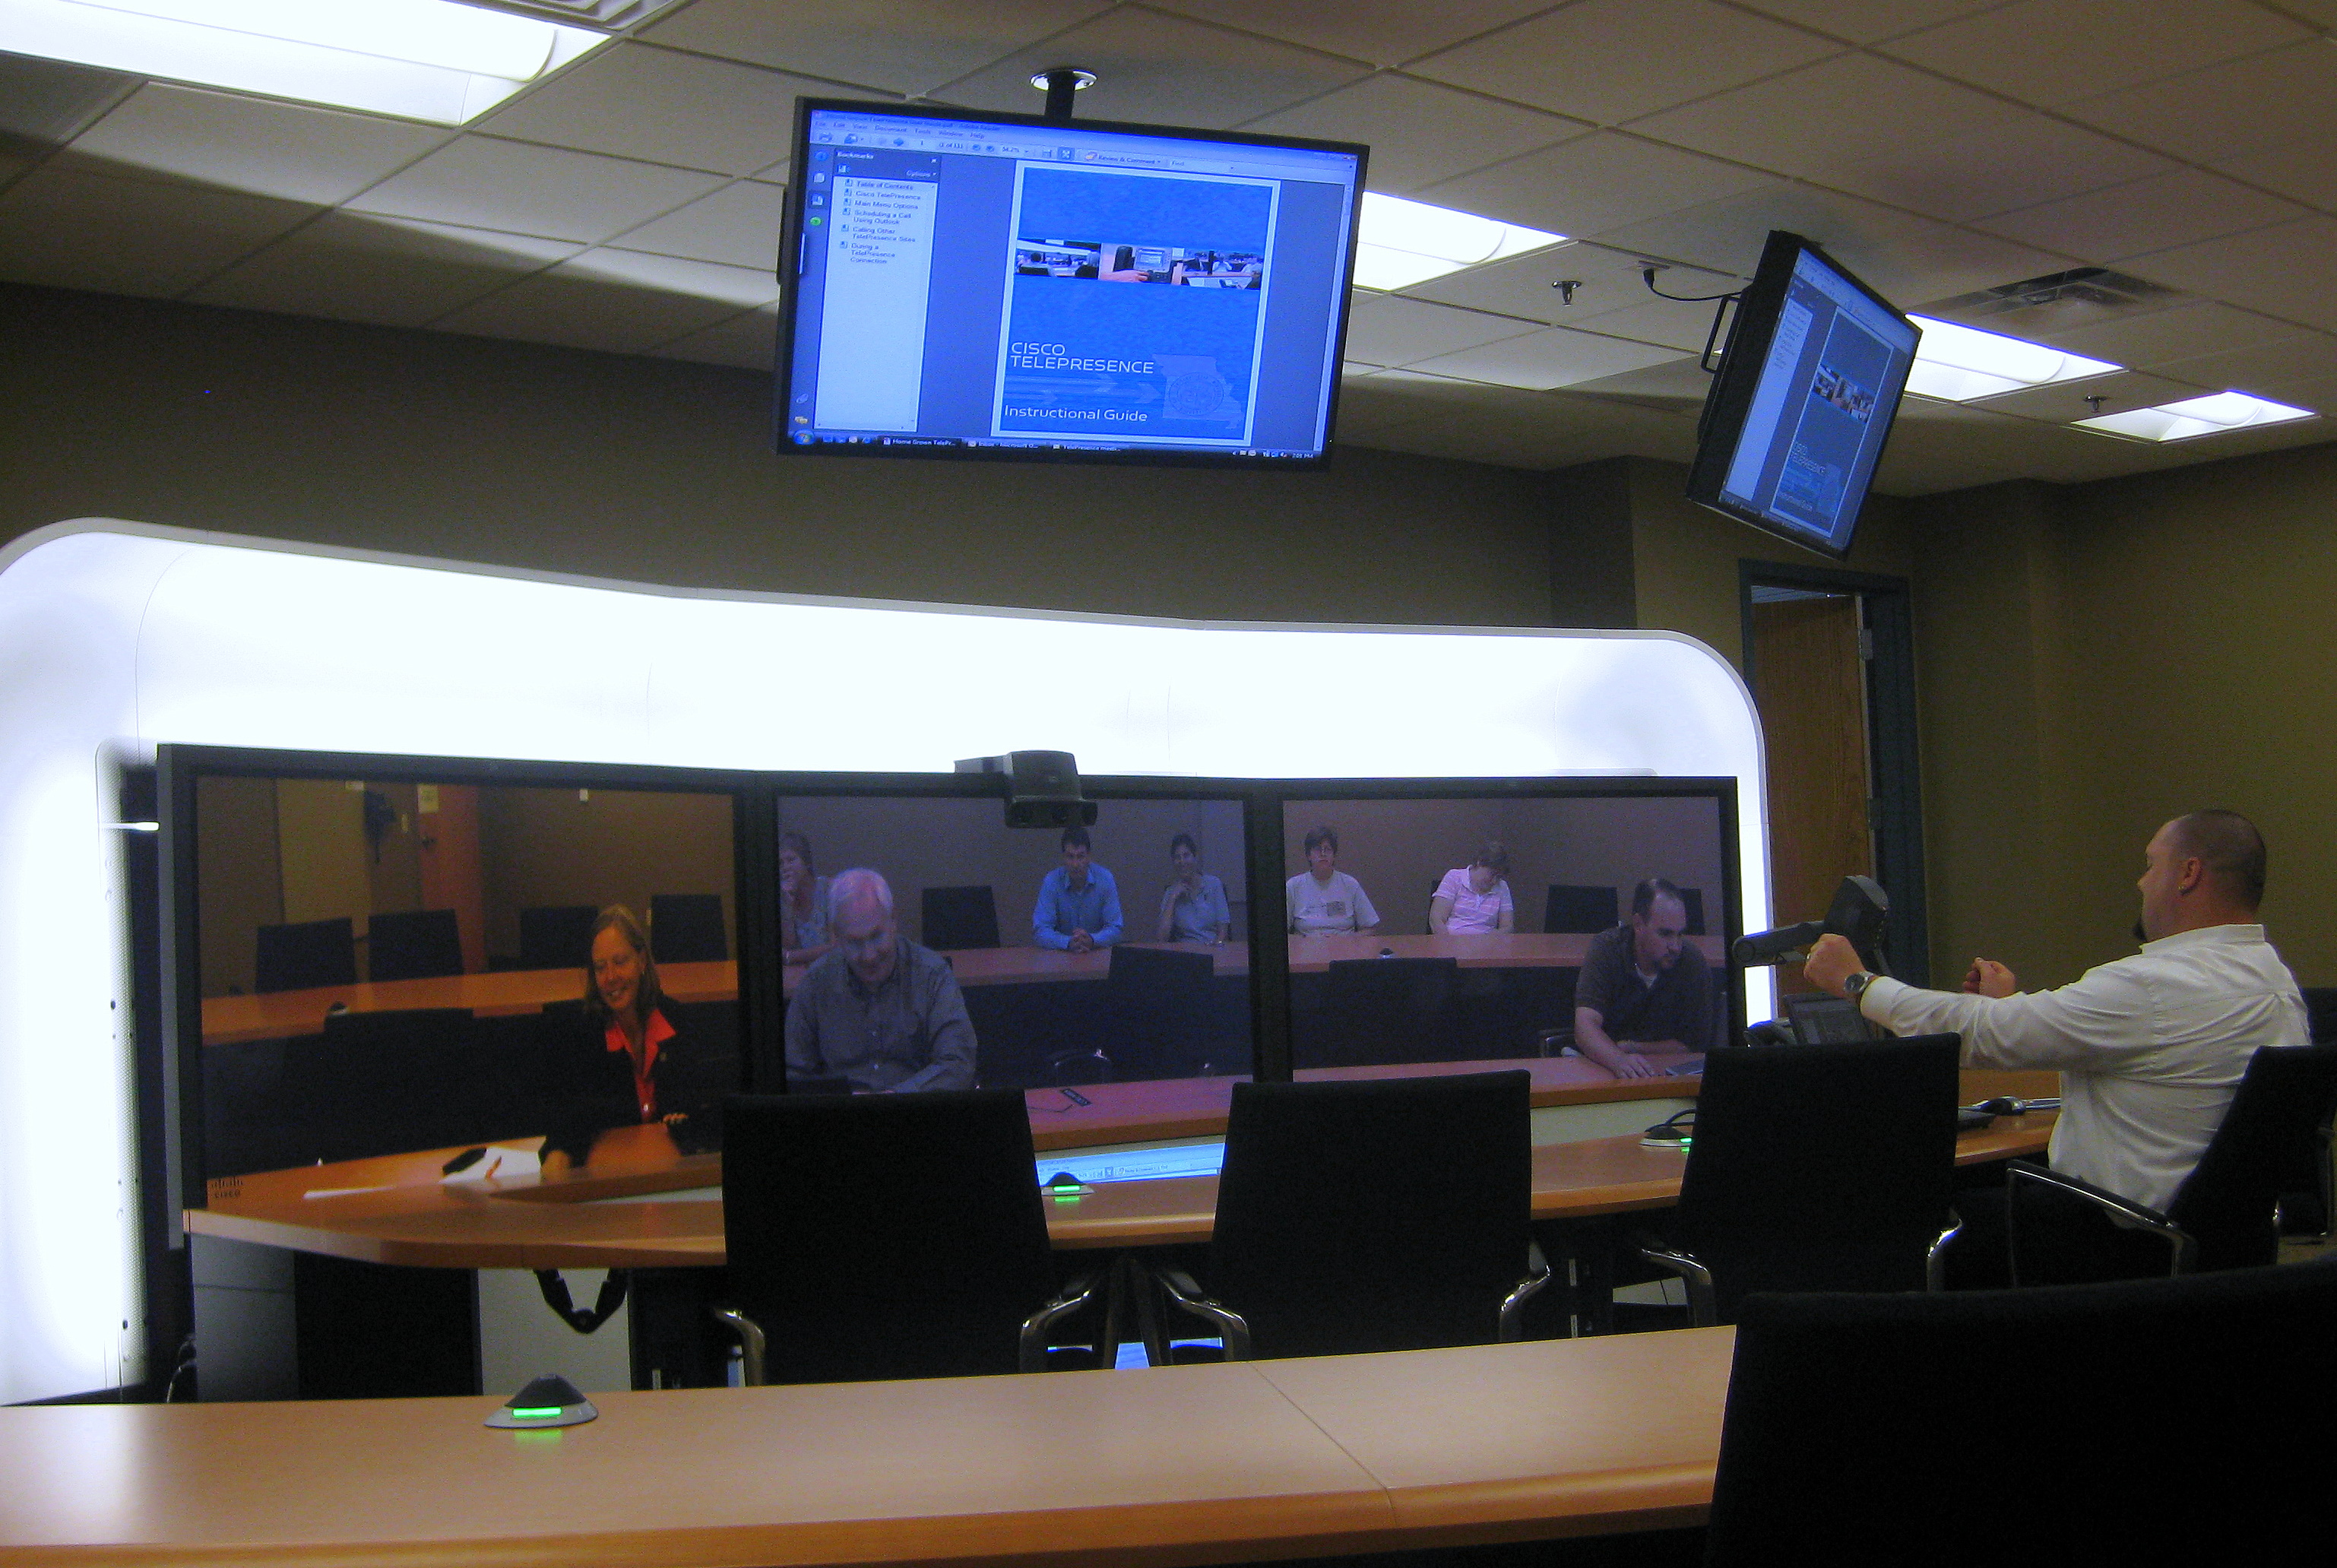 GDSS and Videoconferencing Room at University of Missouri